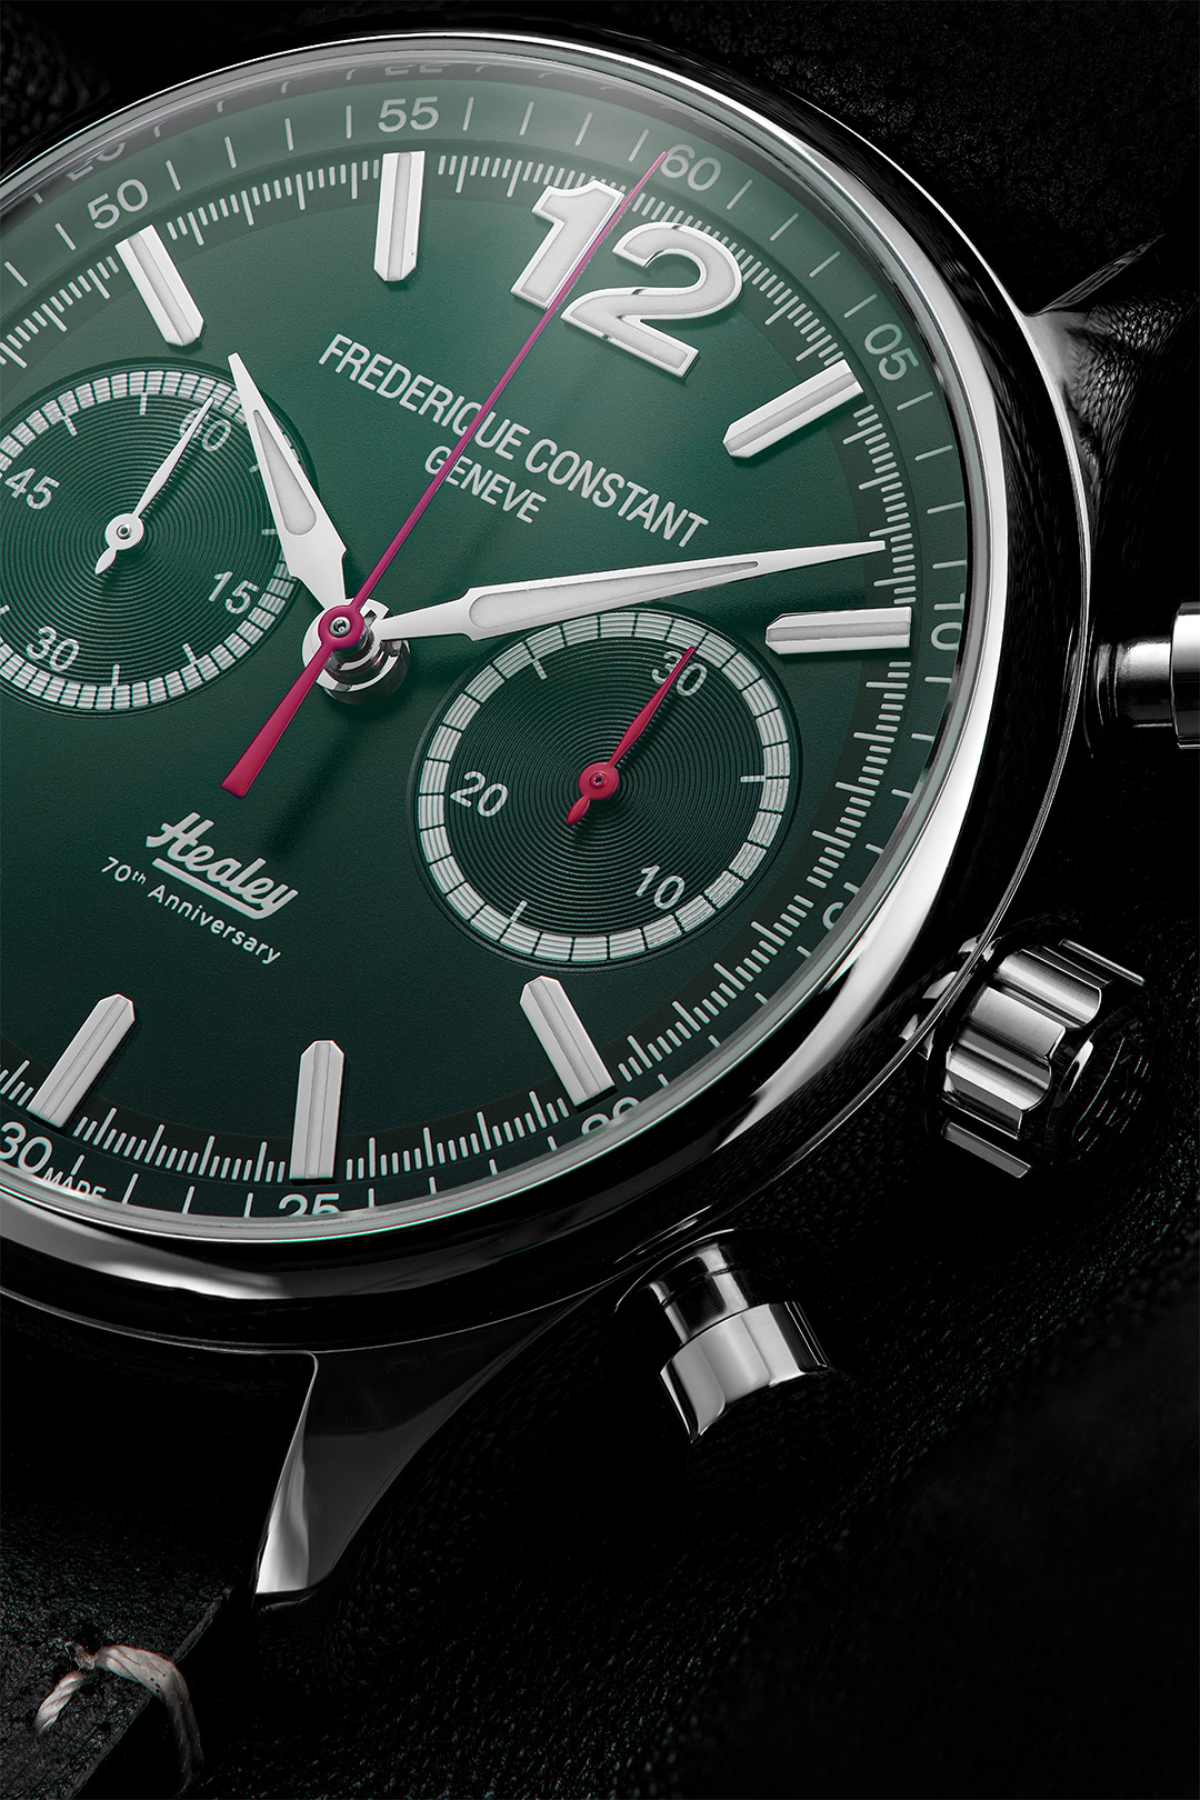 Frederique Constant Celebrates The 70-year Anniversary Of The Austin-Healey Firm